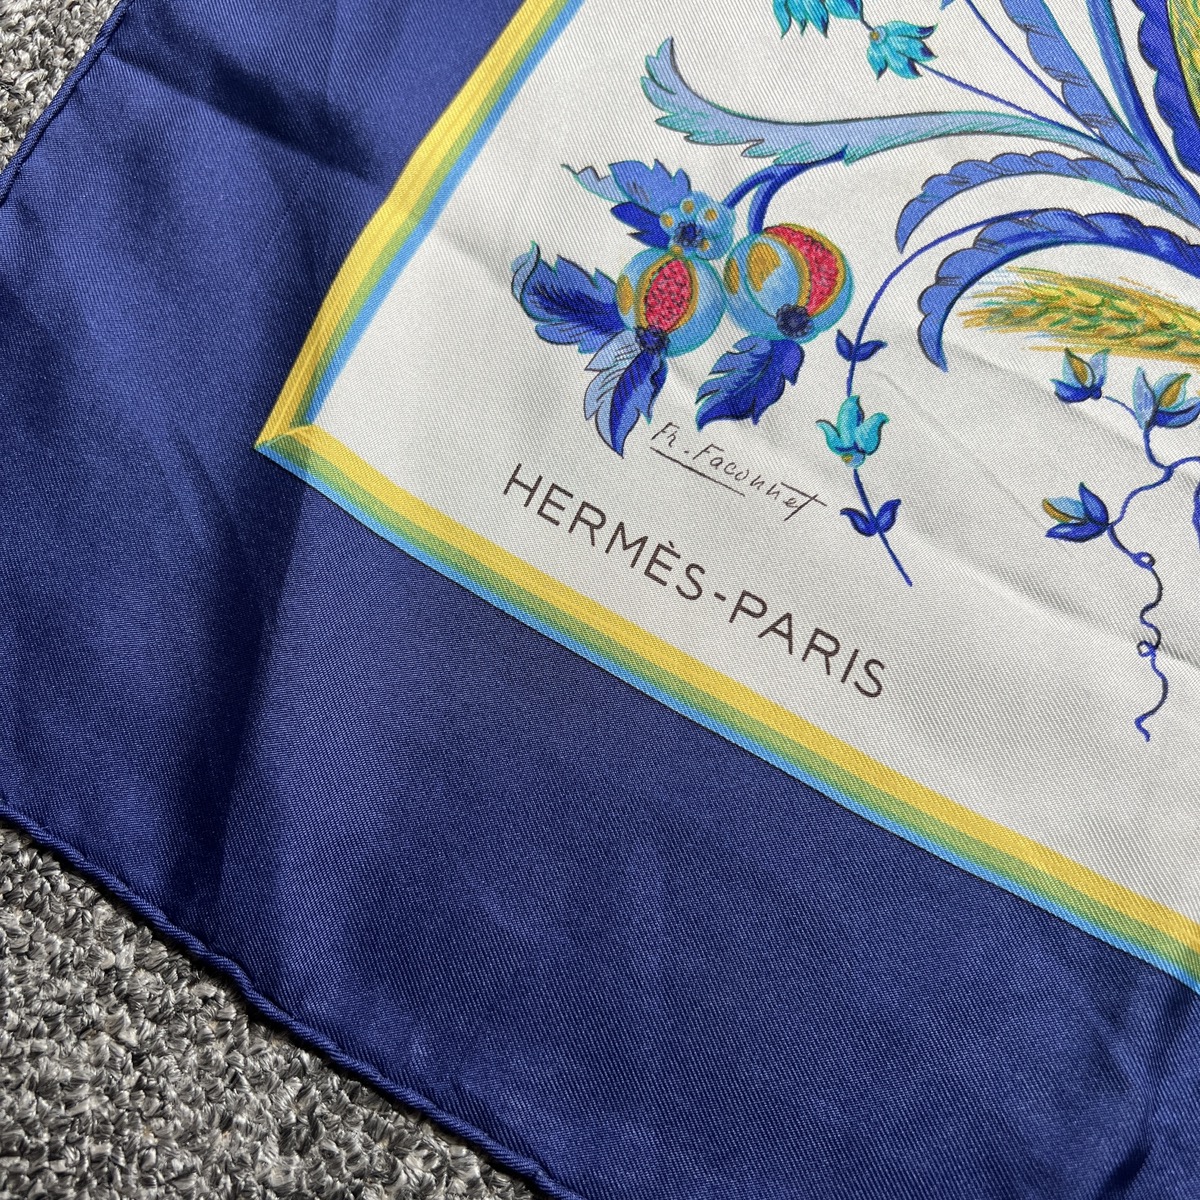 Hermes Ceres by Francoise Faconnet Silk Scarf - 2